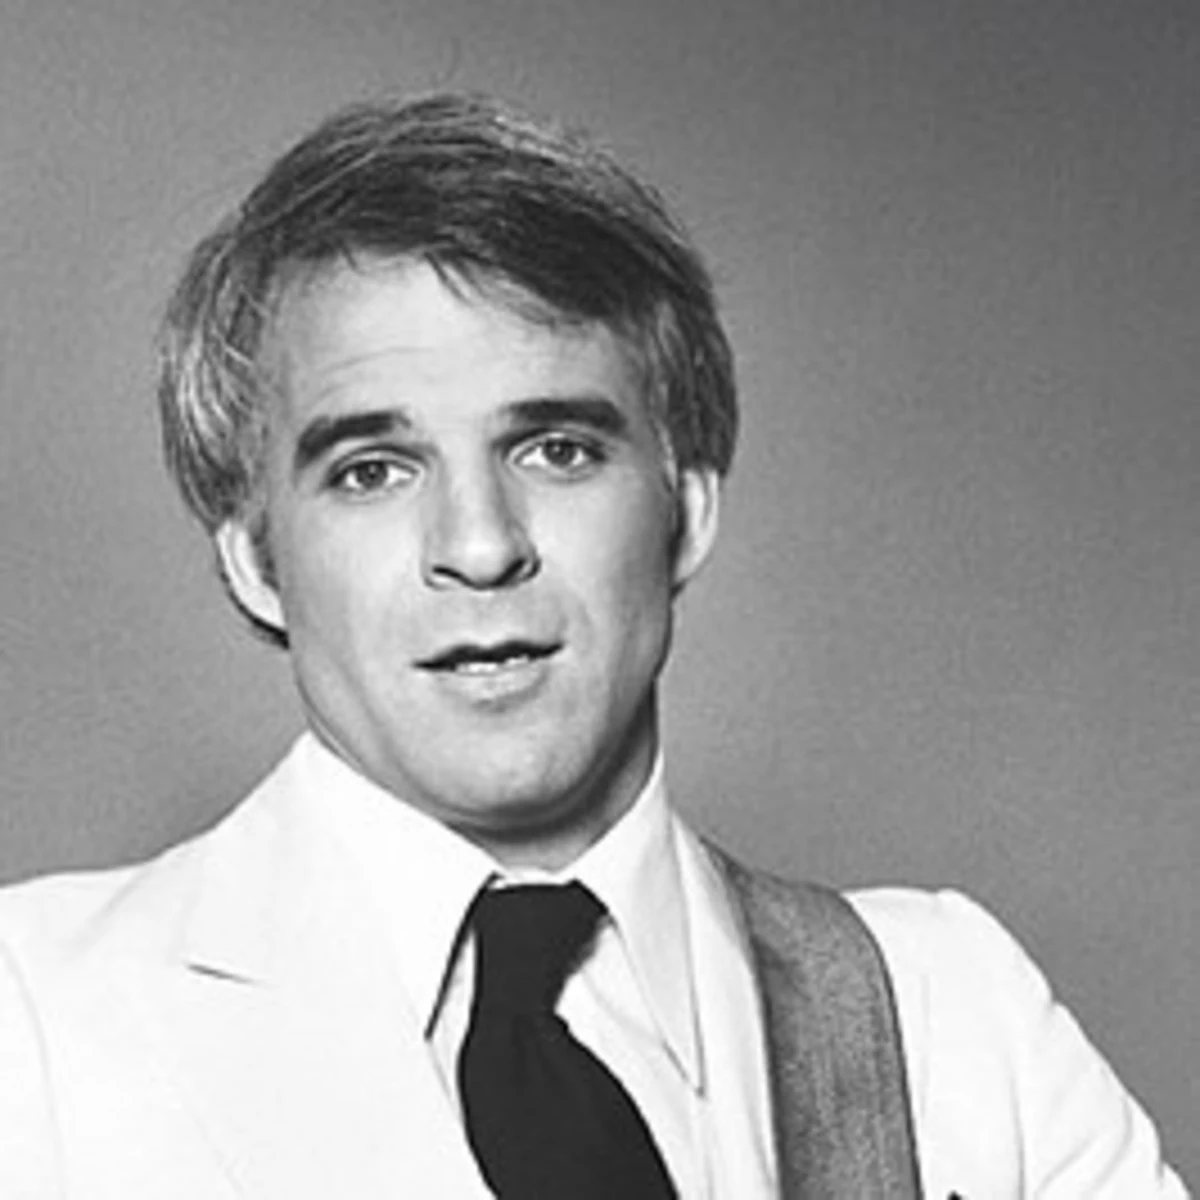 Keep A Sense Of Humor (And Other Life Advice From Steve Martin)